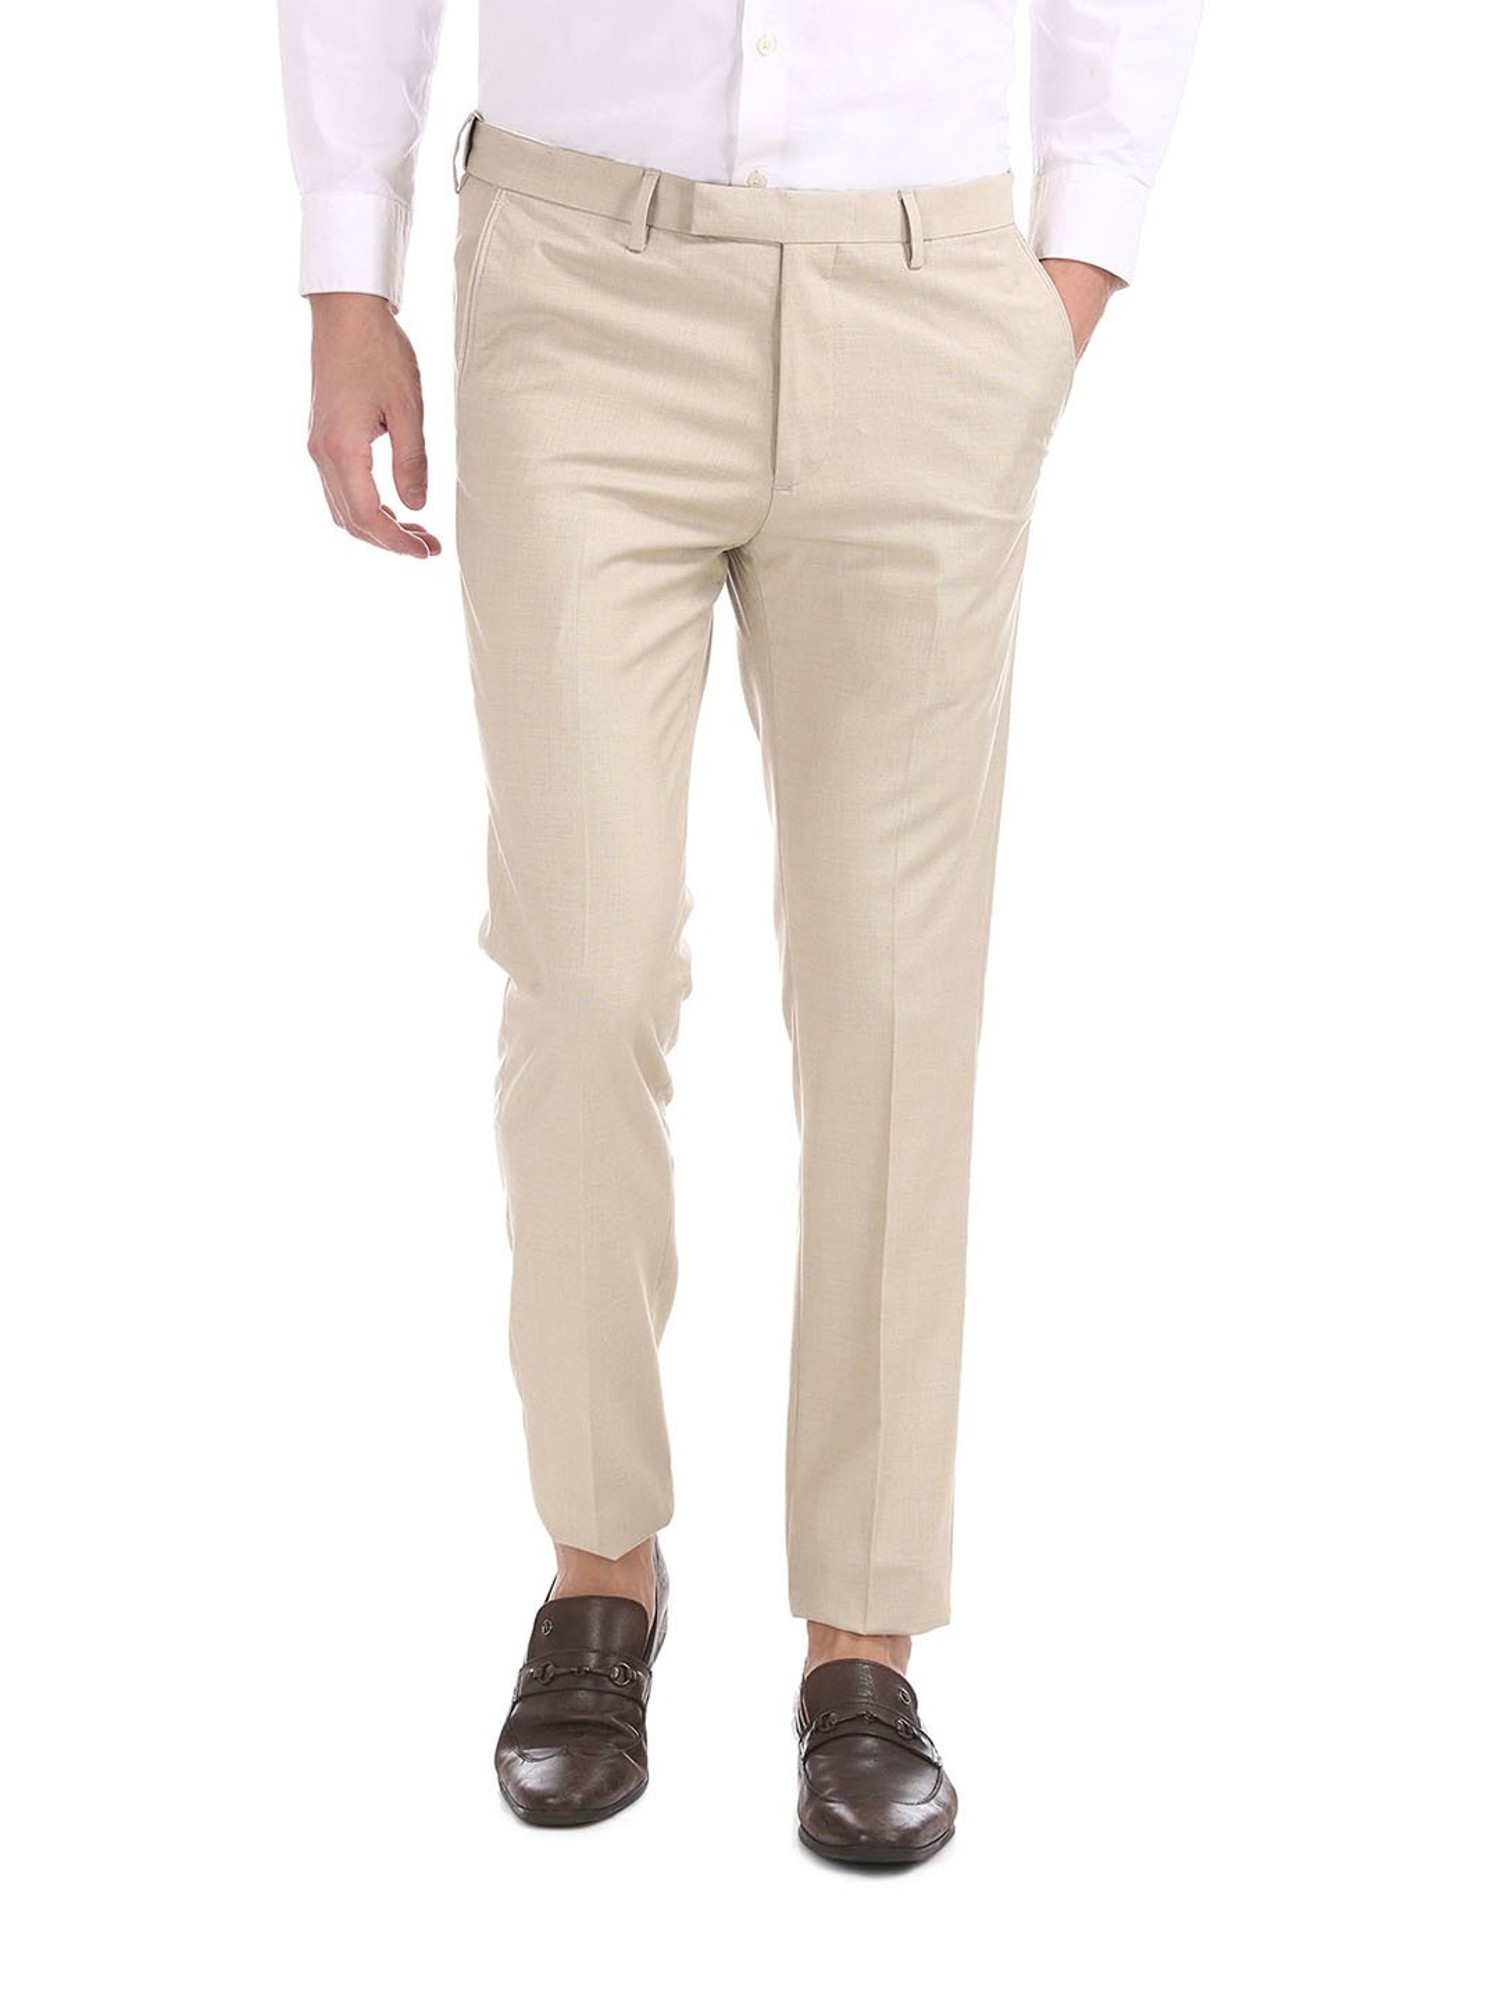 Cotton Mens Formal Trousers Gender  Male Waist Size  28 Inch 30 Inch  32 Inch 34 Inch 36 Inch at Rs 720  Piece in Thiruvananthapuram